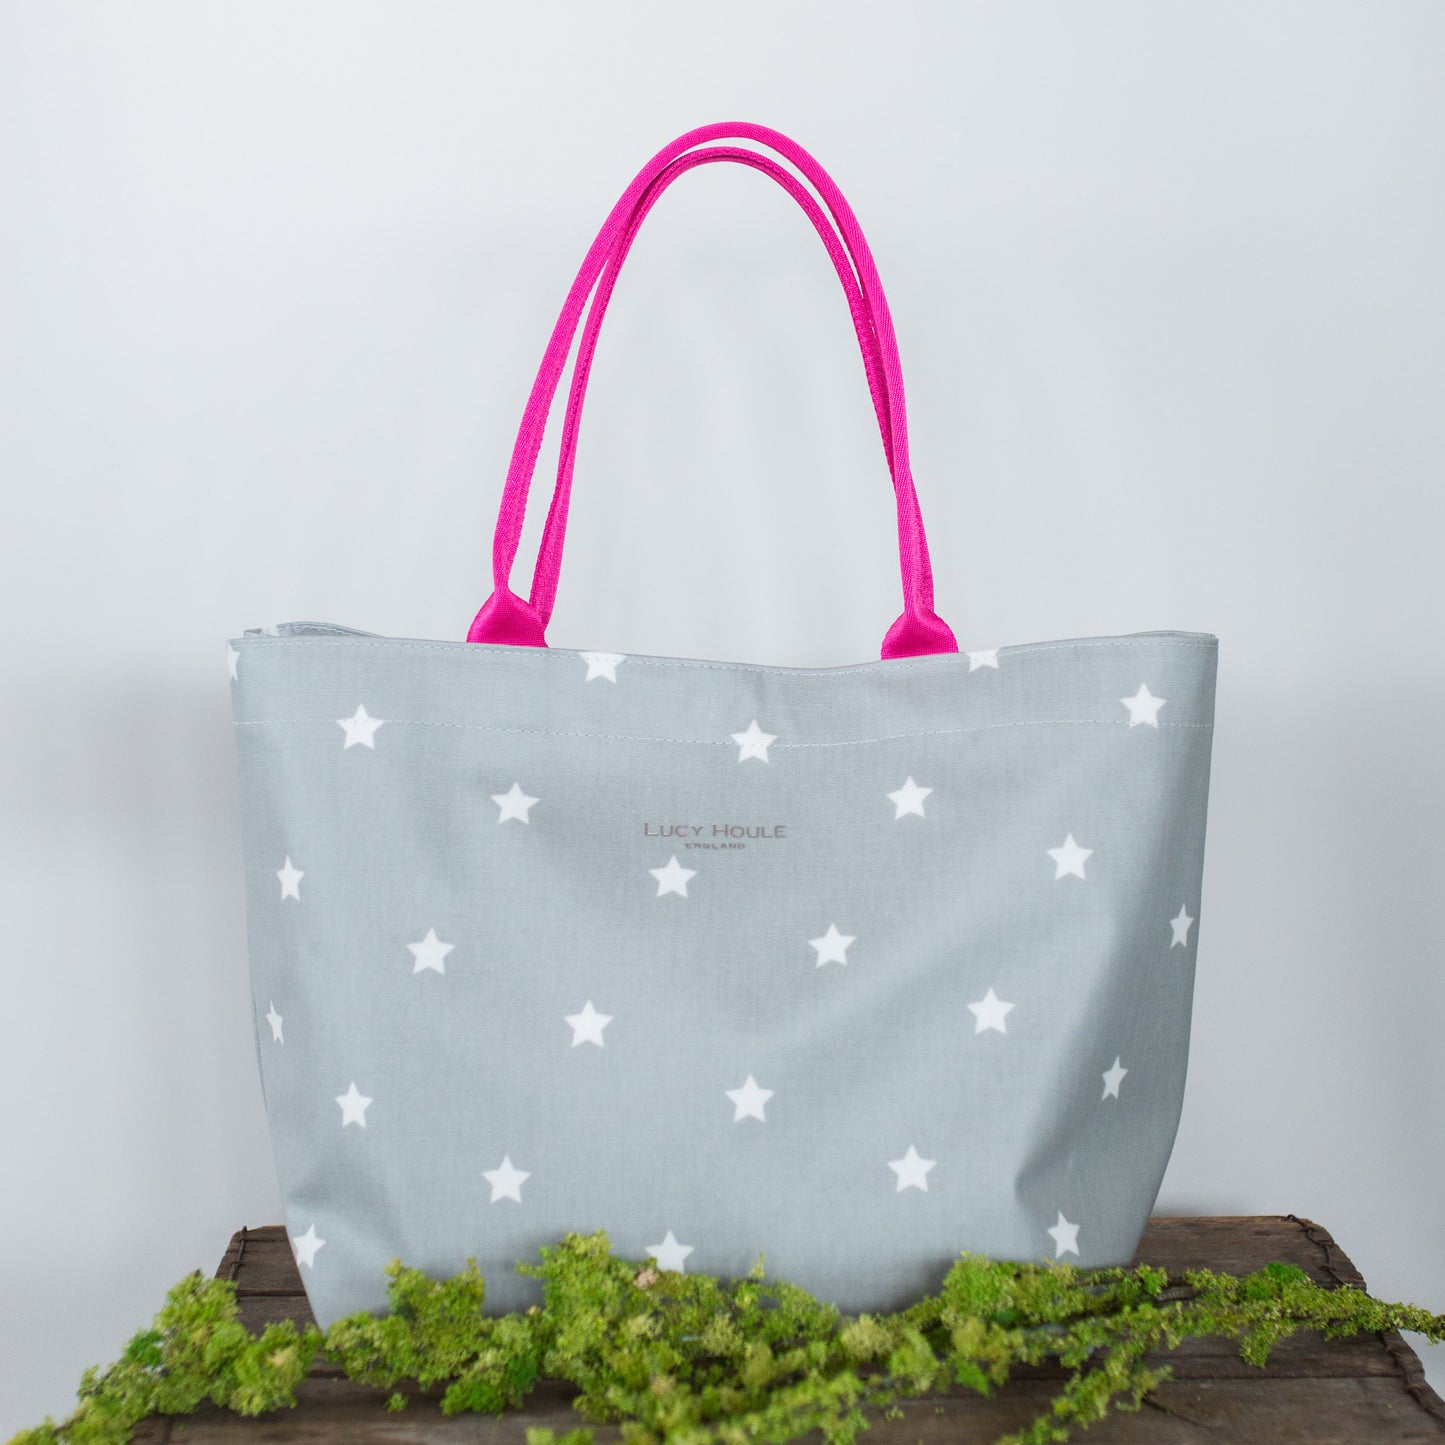 Grey & White Star Small Zip Tote Bag with pink Handles